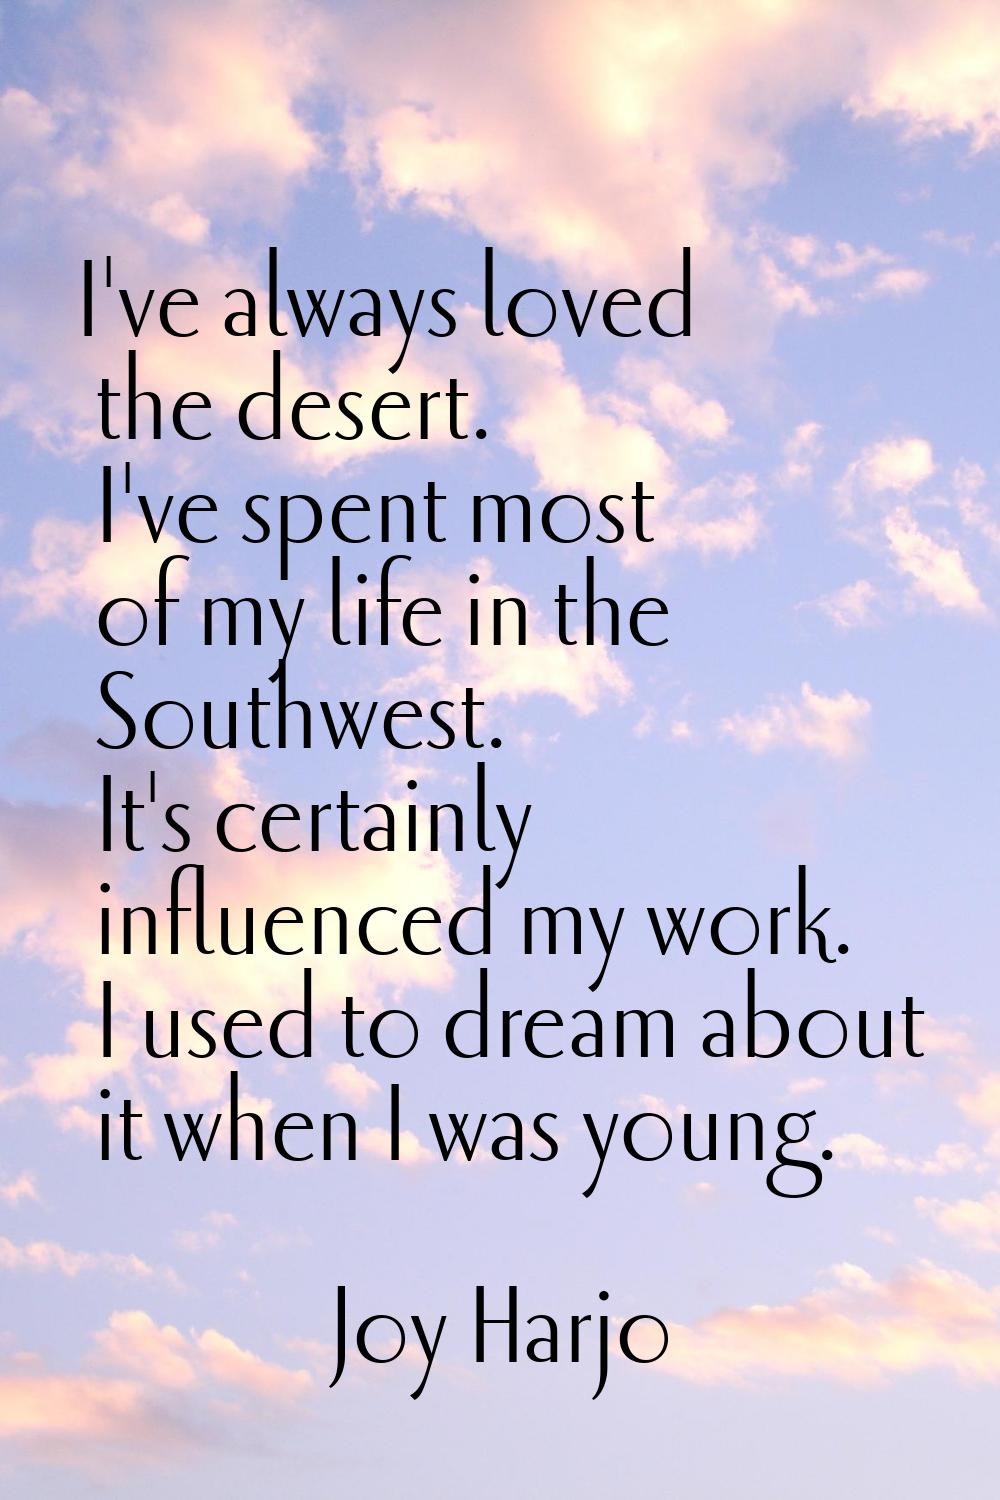 I've always loved the desert. I've spent most of my life in the Southwest. It's certainly influence